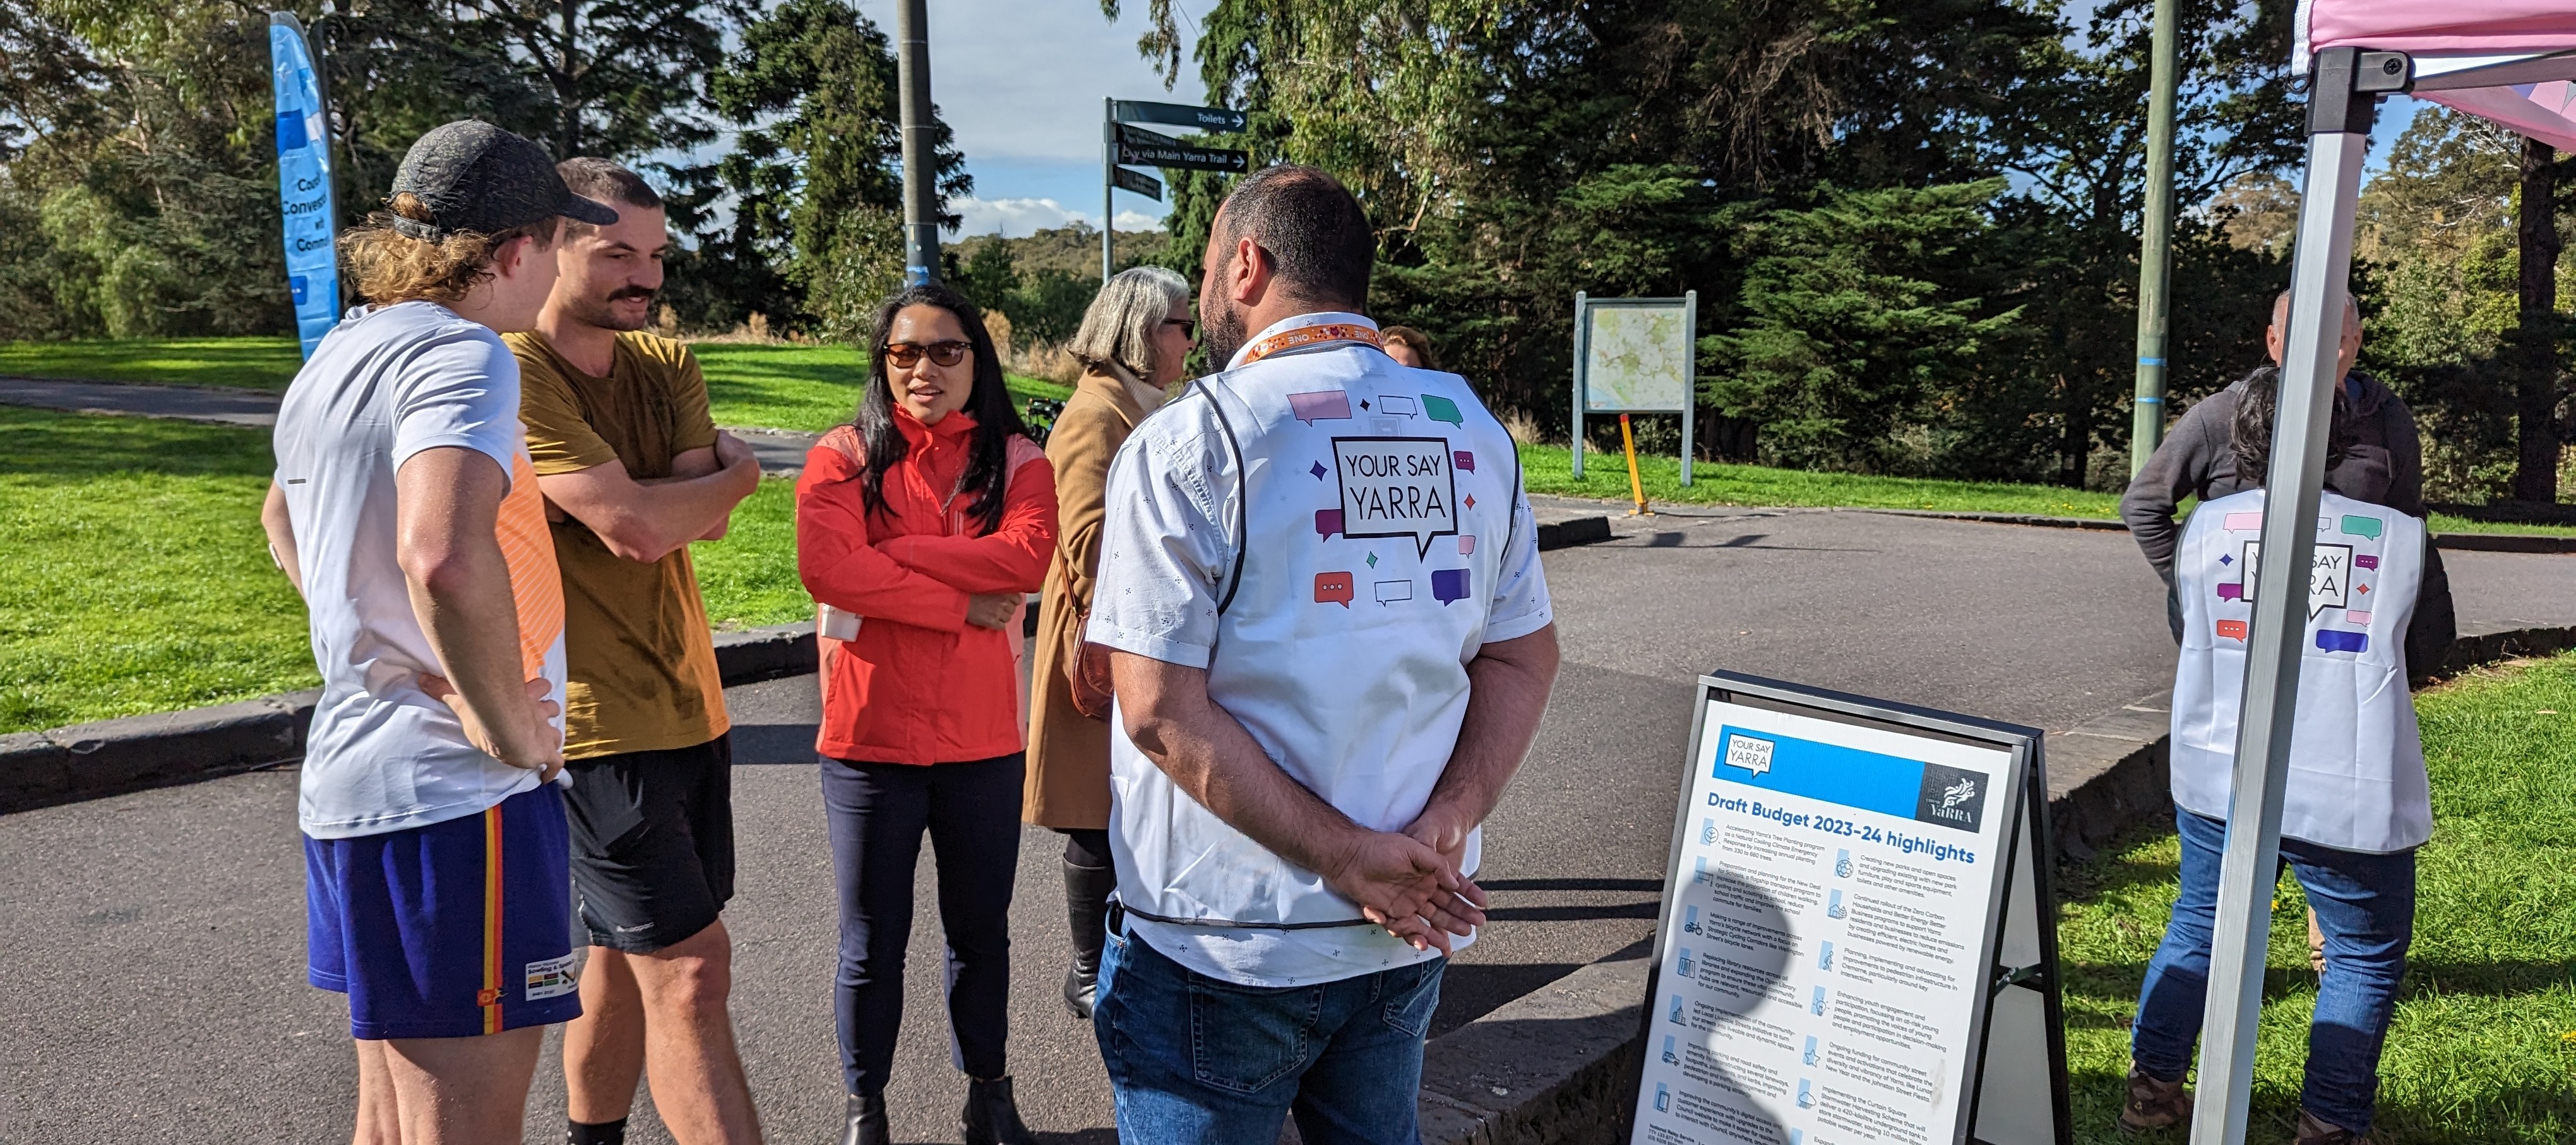 Yarra Councillor Claudia Nguyen talks with members of the community at a local park